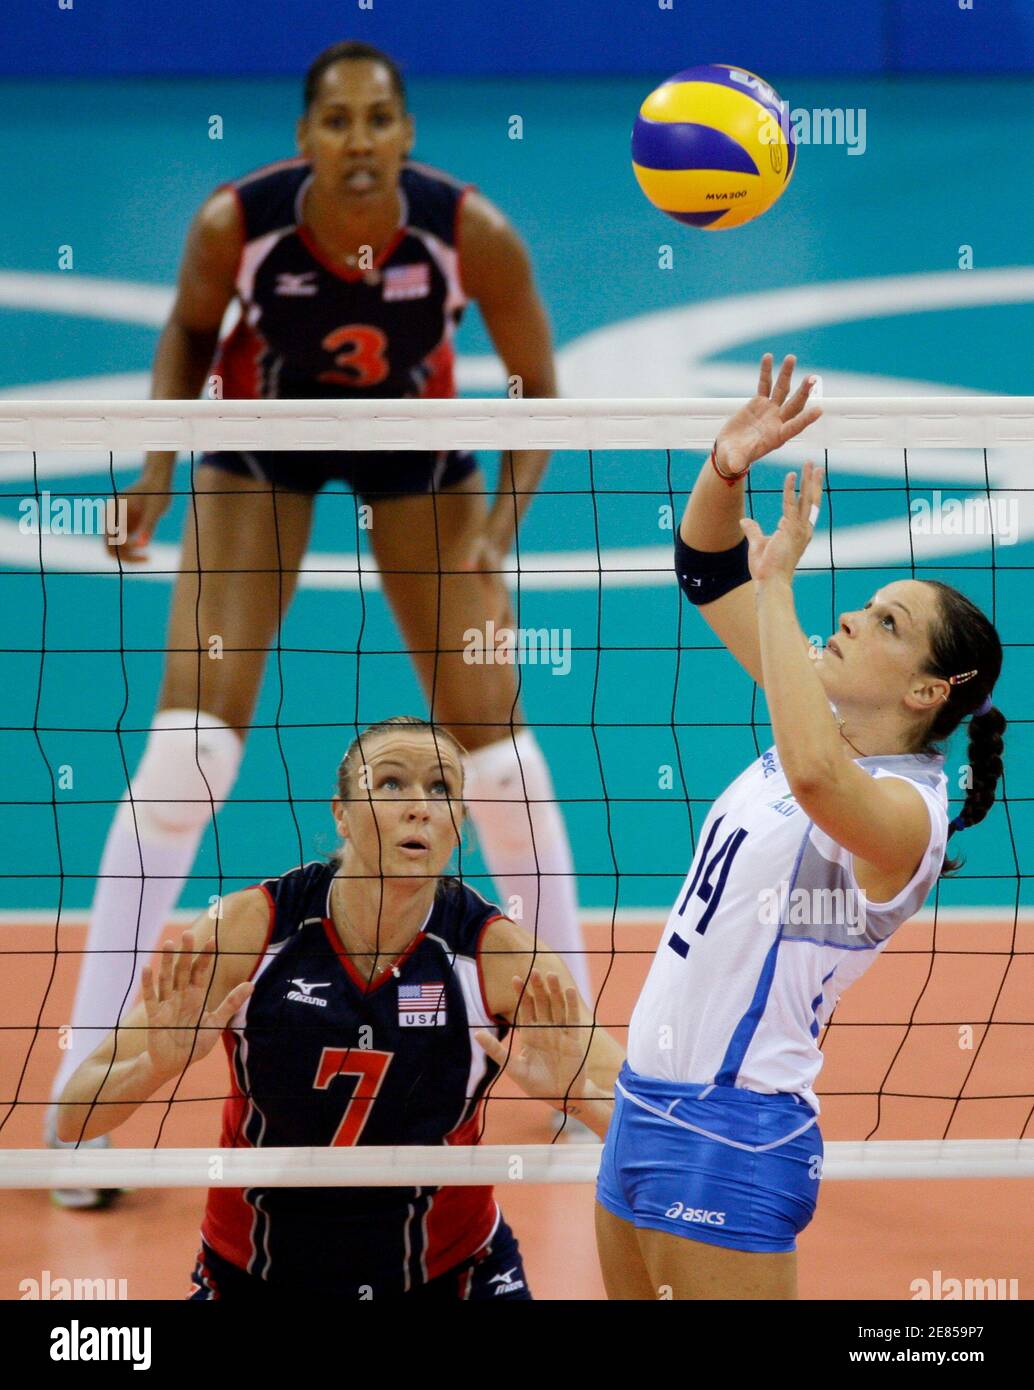 Eleonora Lo Bianco (R) of Italy throws the as Heather Bown and Tayyiba Haneef-Park (L) of the U.S. prepare to block their women's quarter-final volleyball match at the Beijing 2008